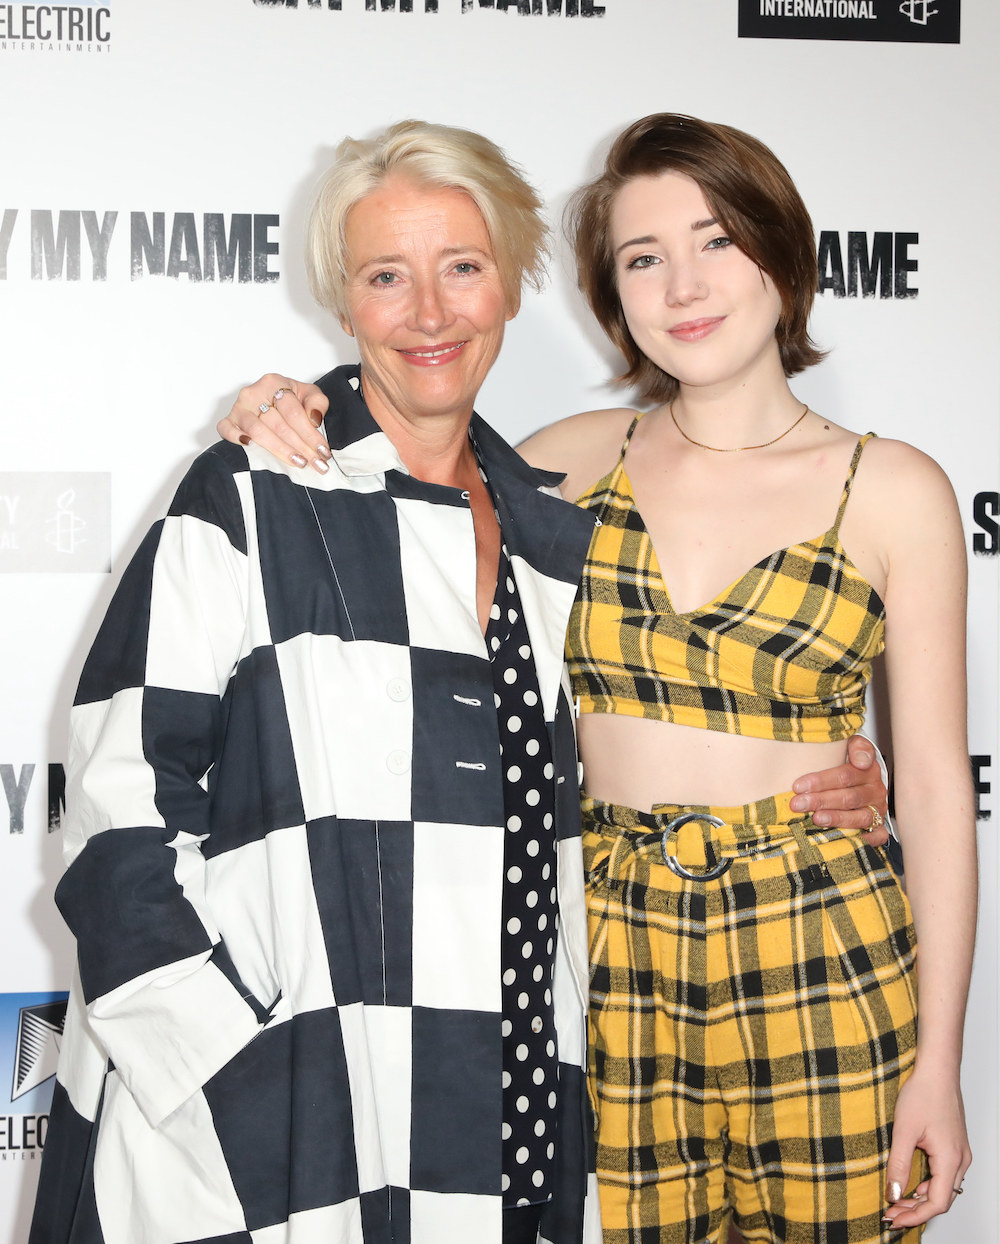 Emma in a checkered-print outfit and Gaia in plaid with their arms around each other on the red carpet